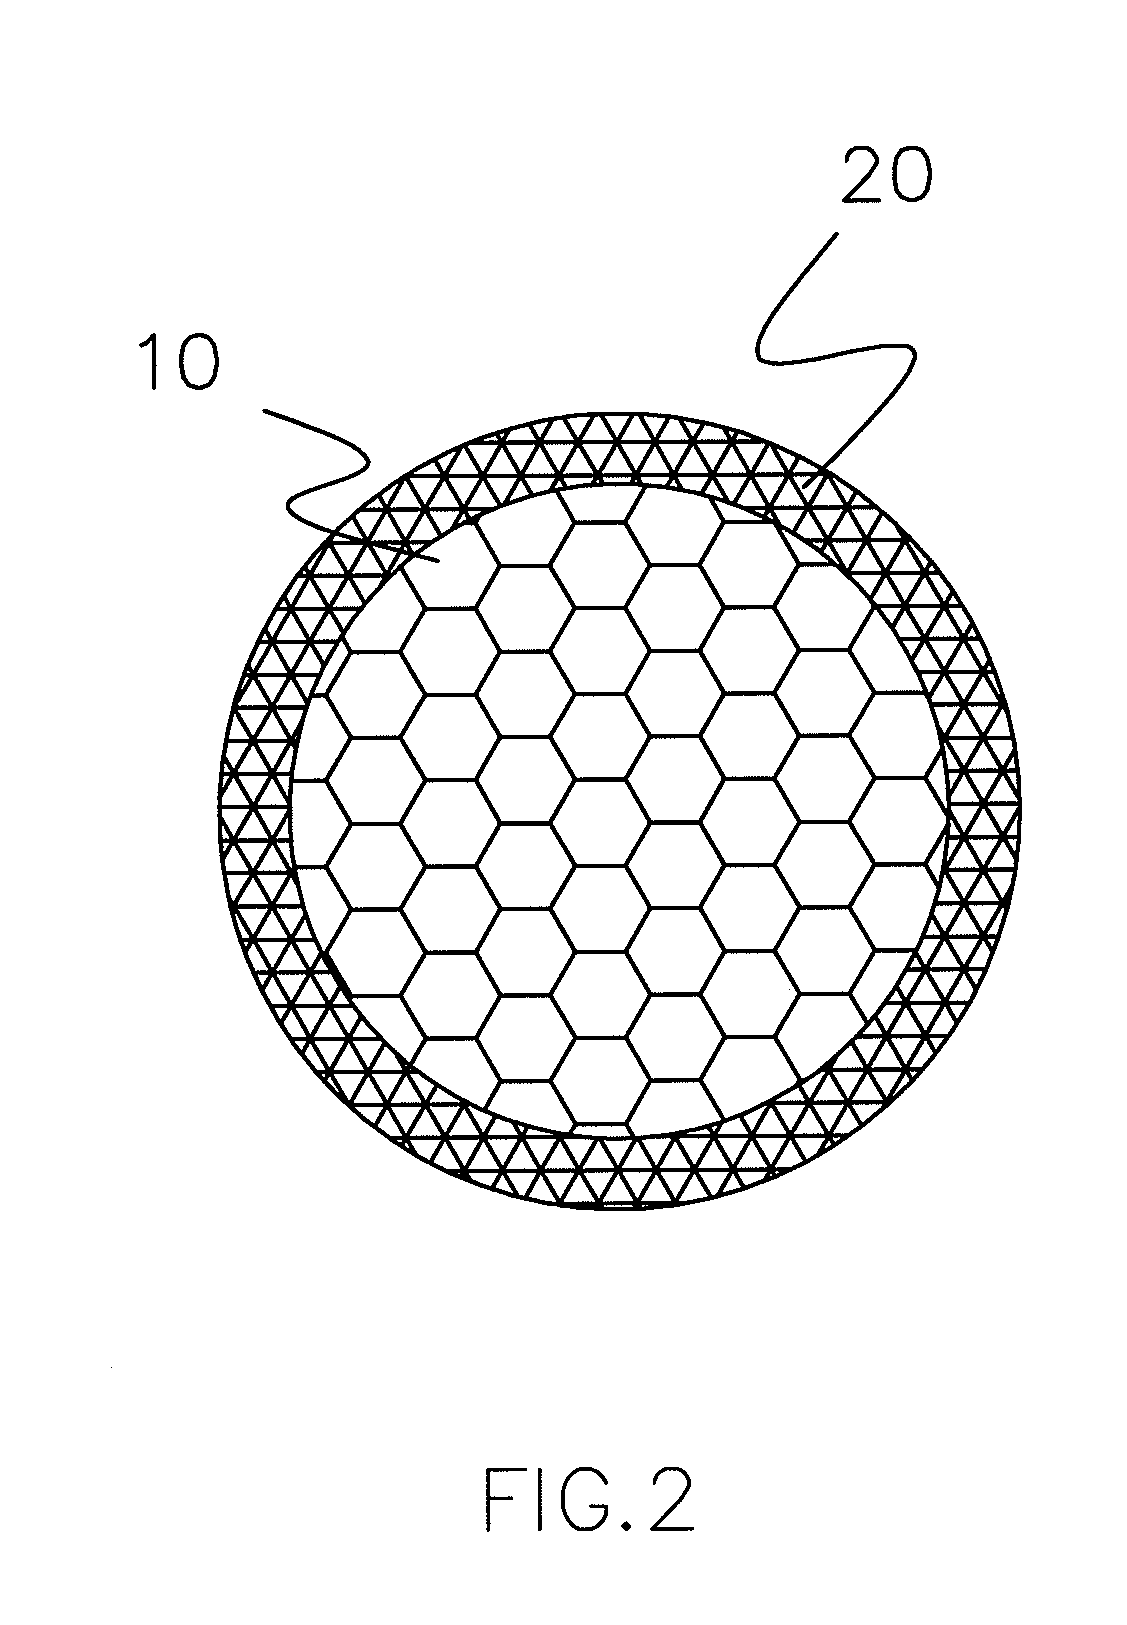 Electrical heating wire containing carbon fiber